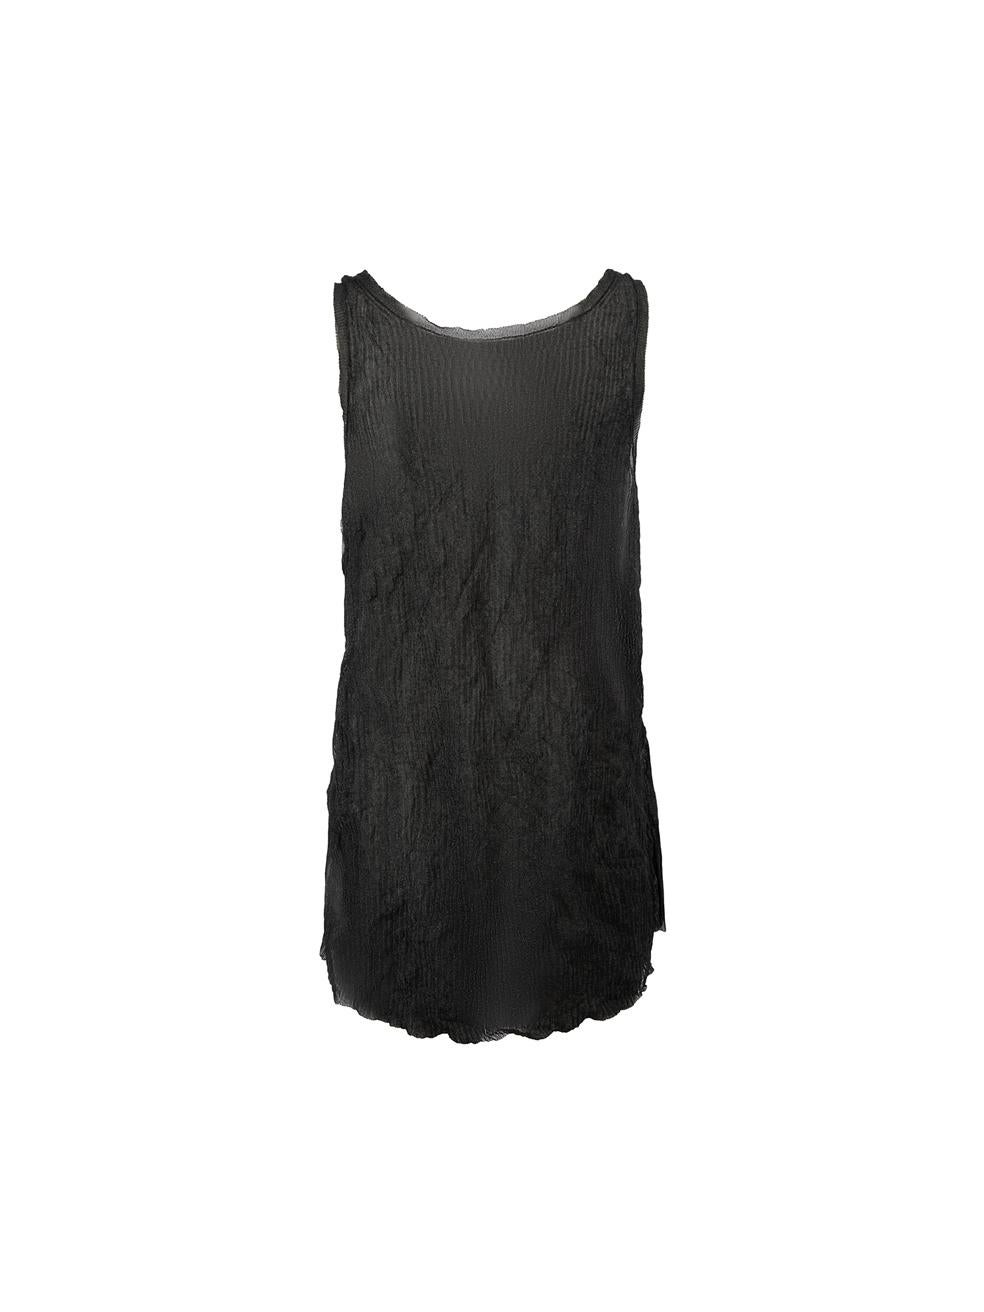 MM6 Maison Margiela Grey Sheer Textured Tank Top Size M In Good Condition For Sale In London, GB